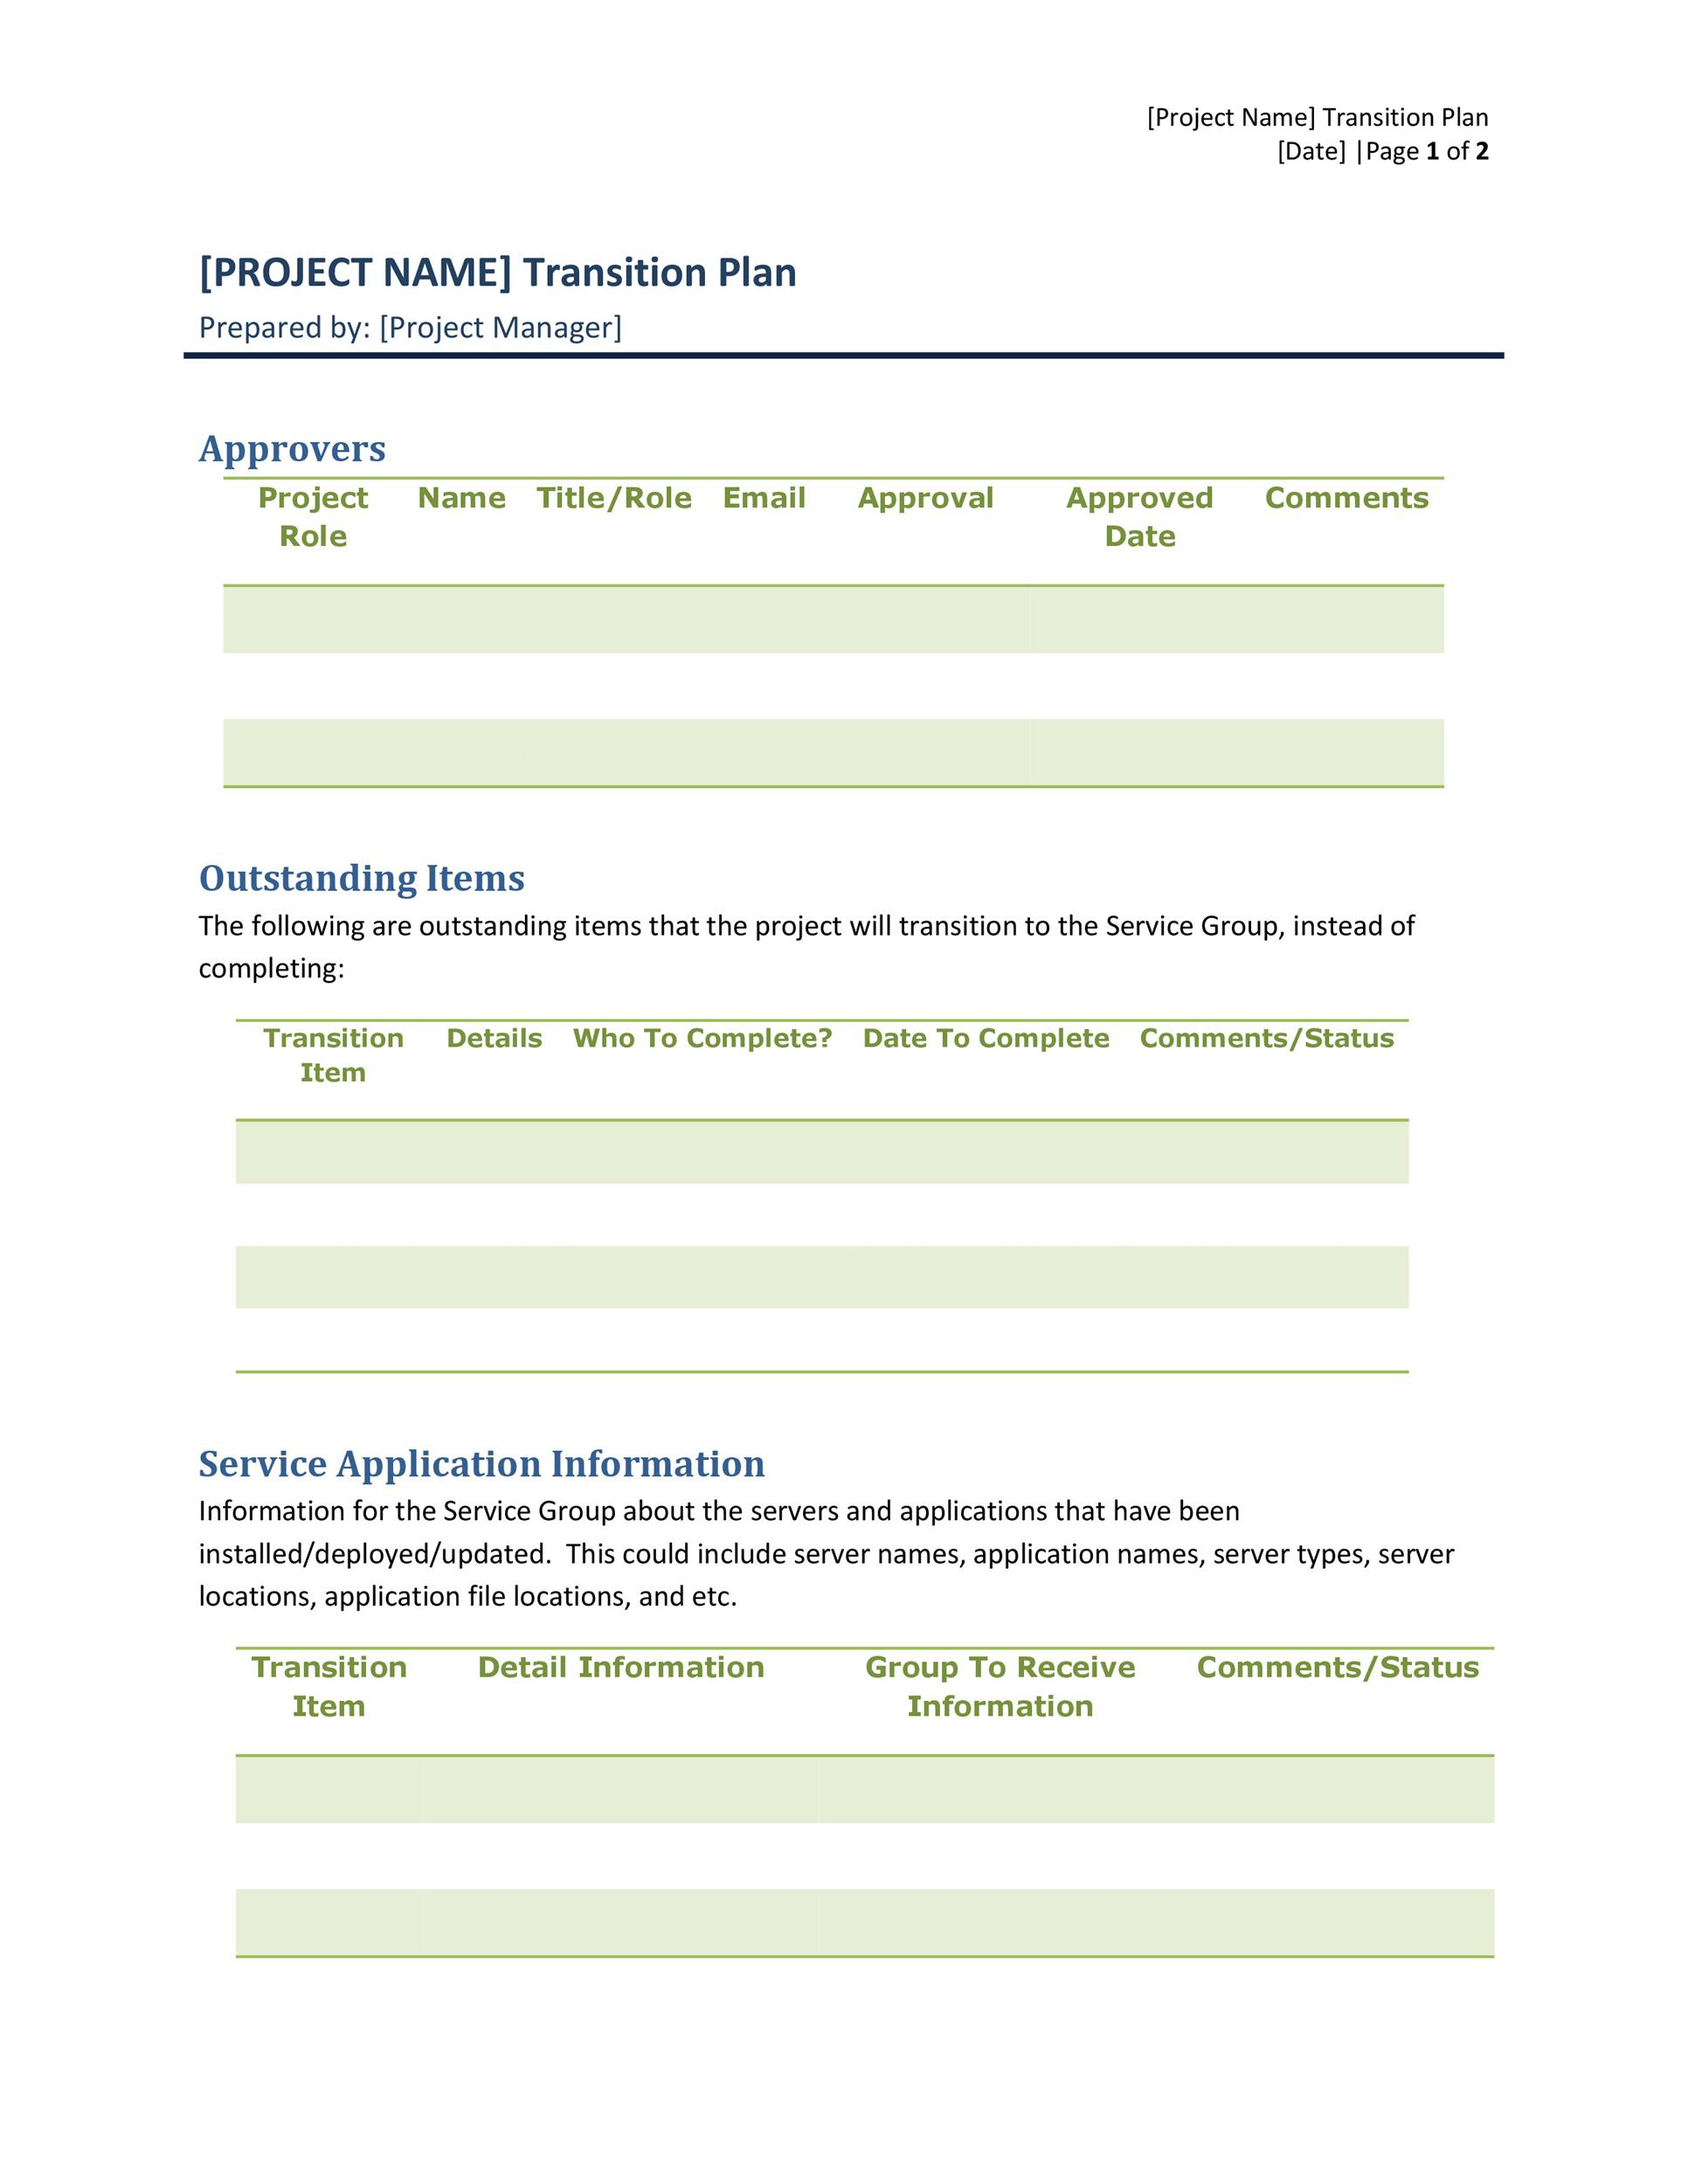 Project Transition Plan Template Excel Misse Rsd7 Org pertaining to Awesome Business Process Transition Plan Template